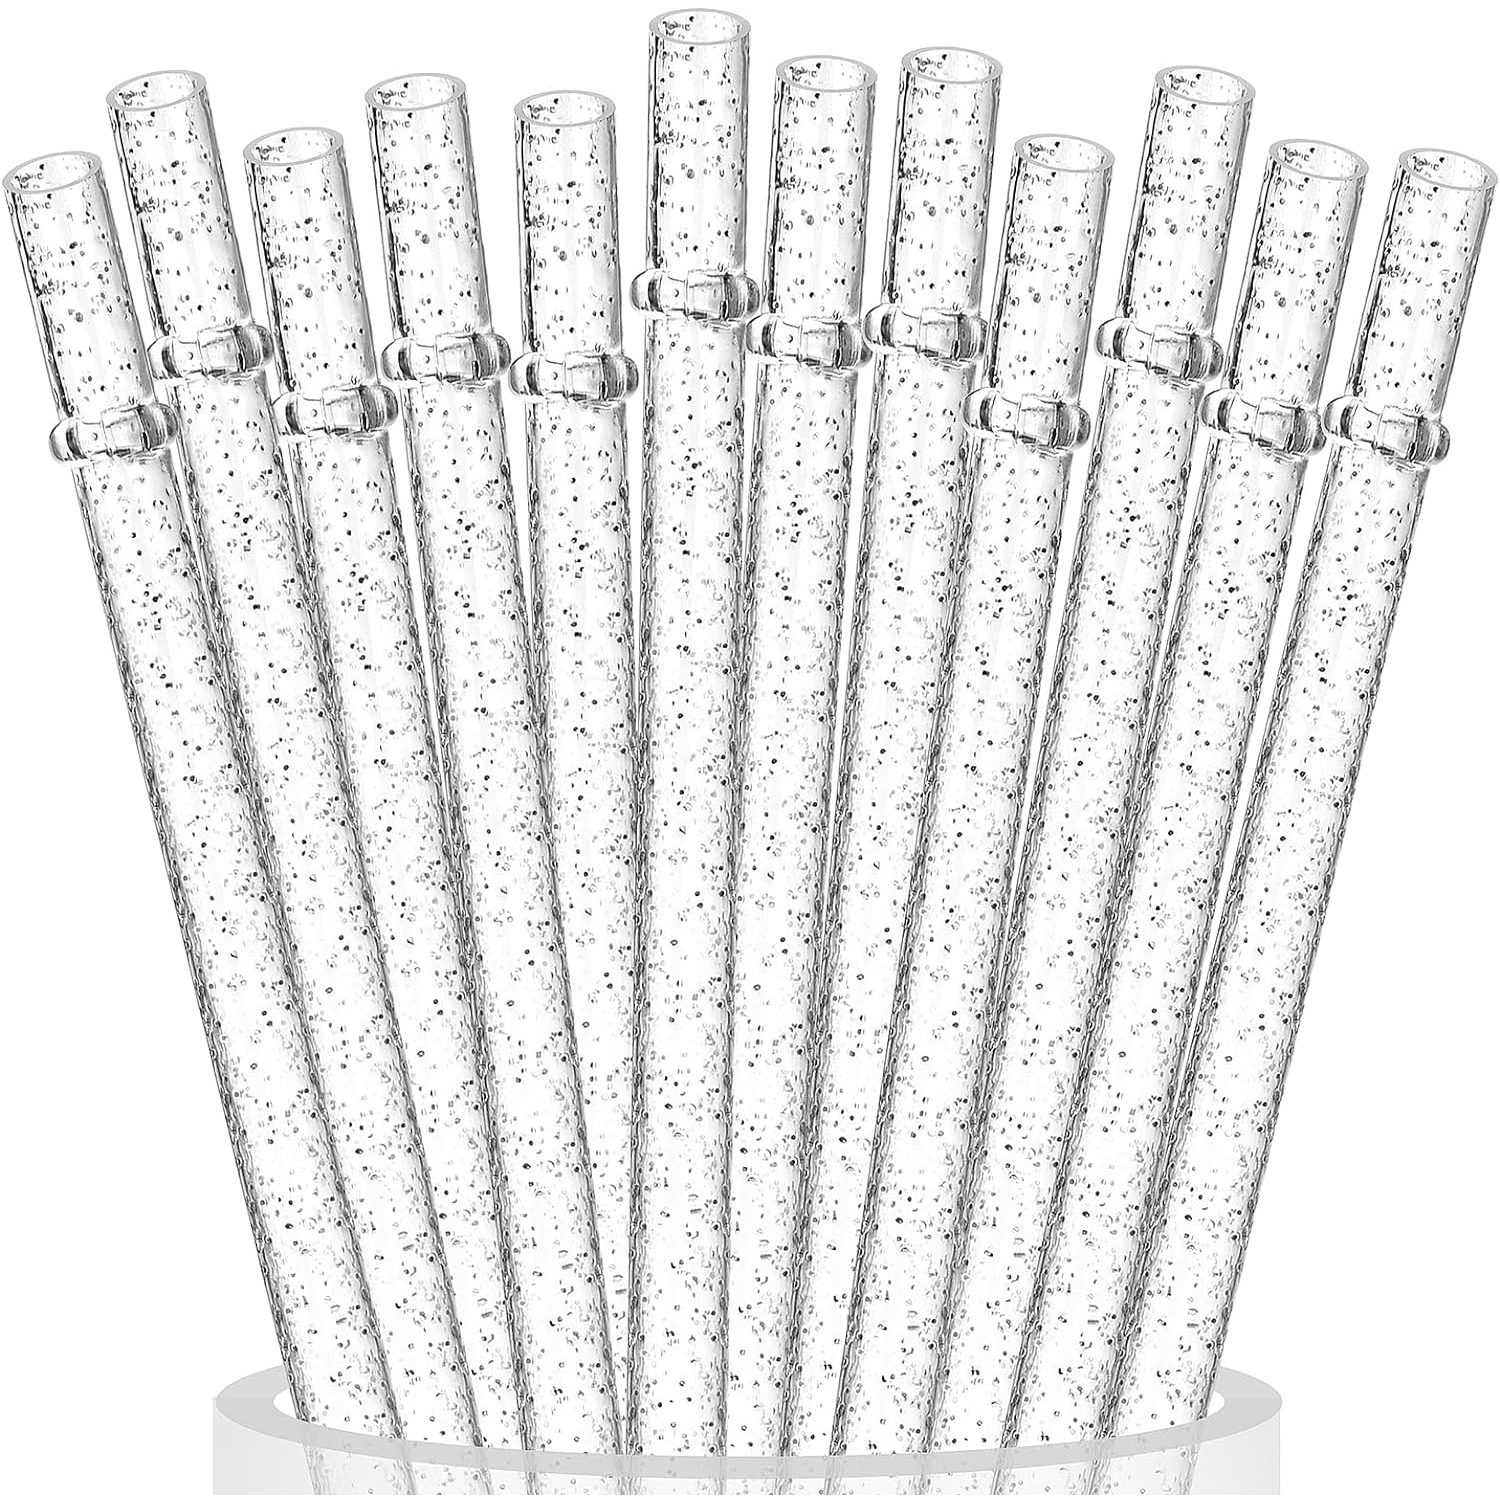 Straw, Replacement Straws For Stanley Tumbler, Long Reusable Plastic  Glitter Straws For Stanley Cup Accessories, Half Gallon Jug, With 1  Cleaning Brush, Chrismas Party Supplies - Temu